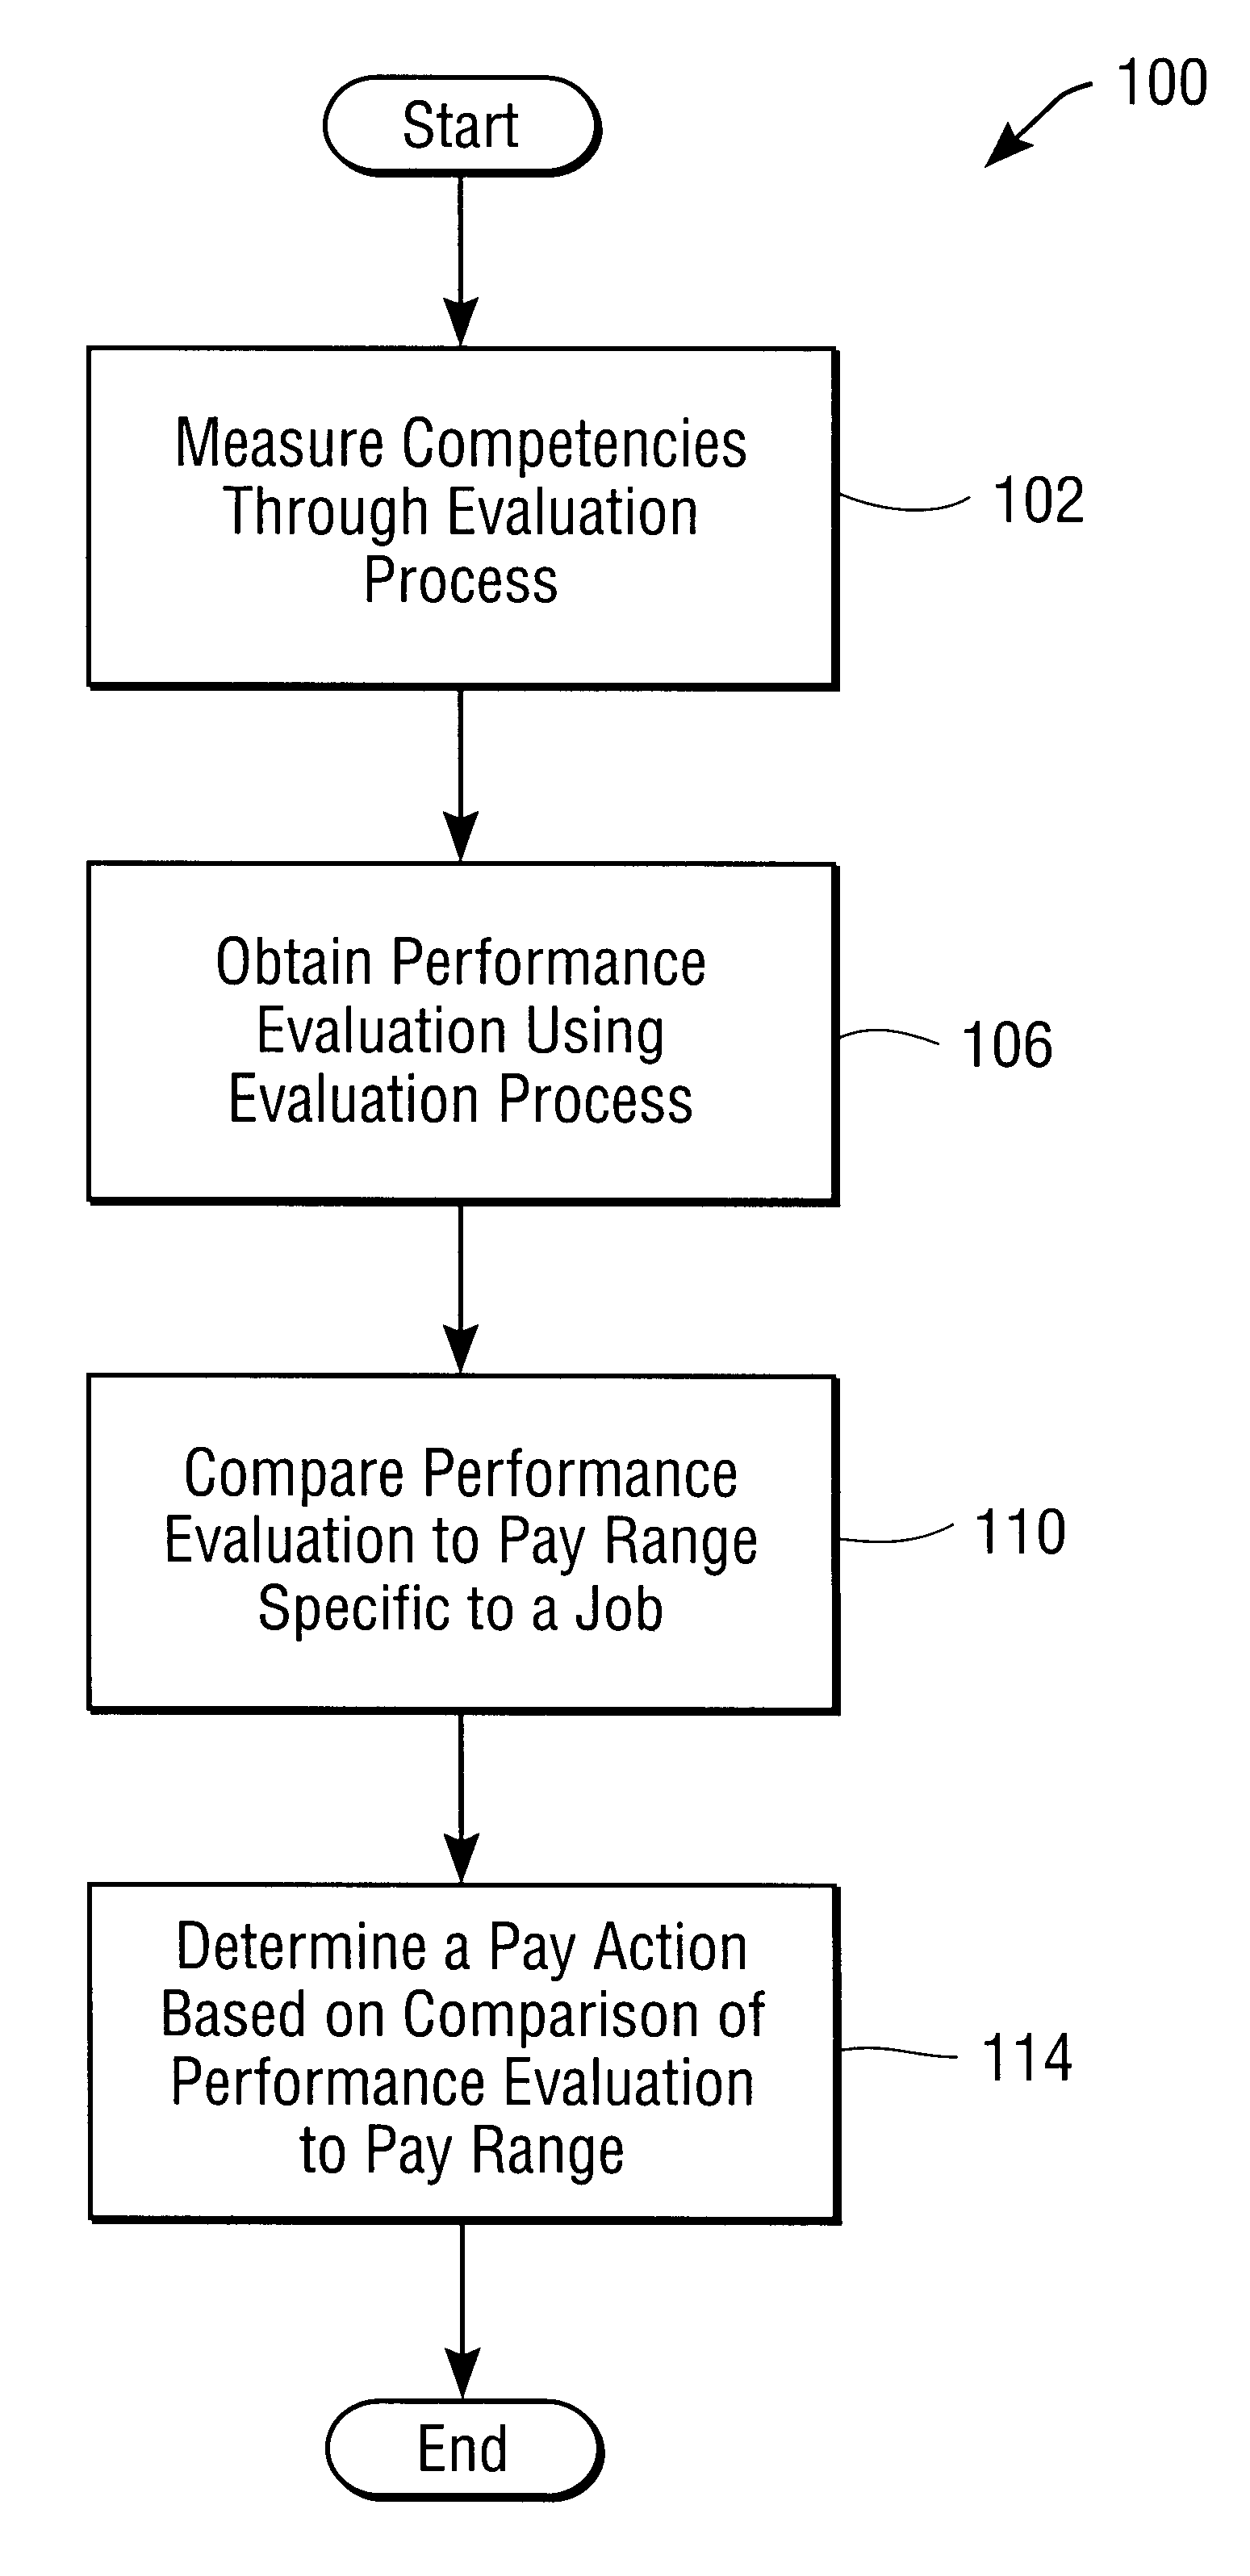 Method and apparatus for integrating competency measures in compensation decisions